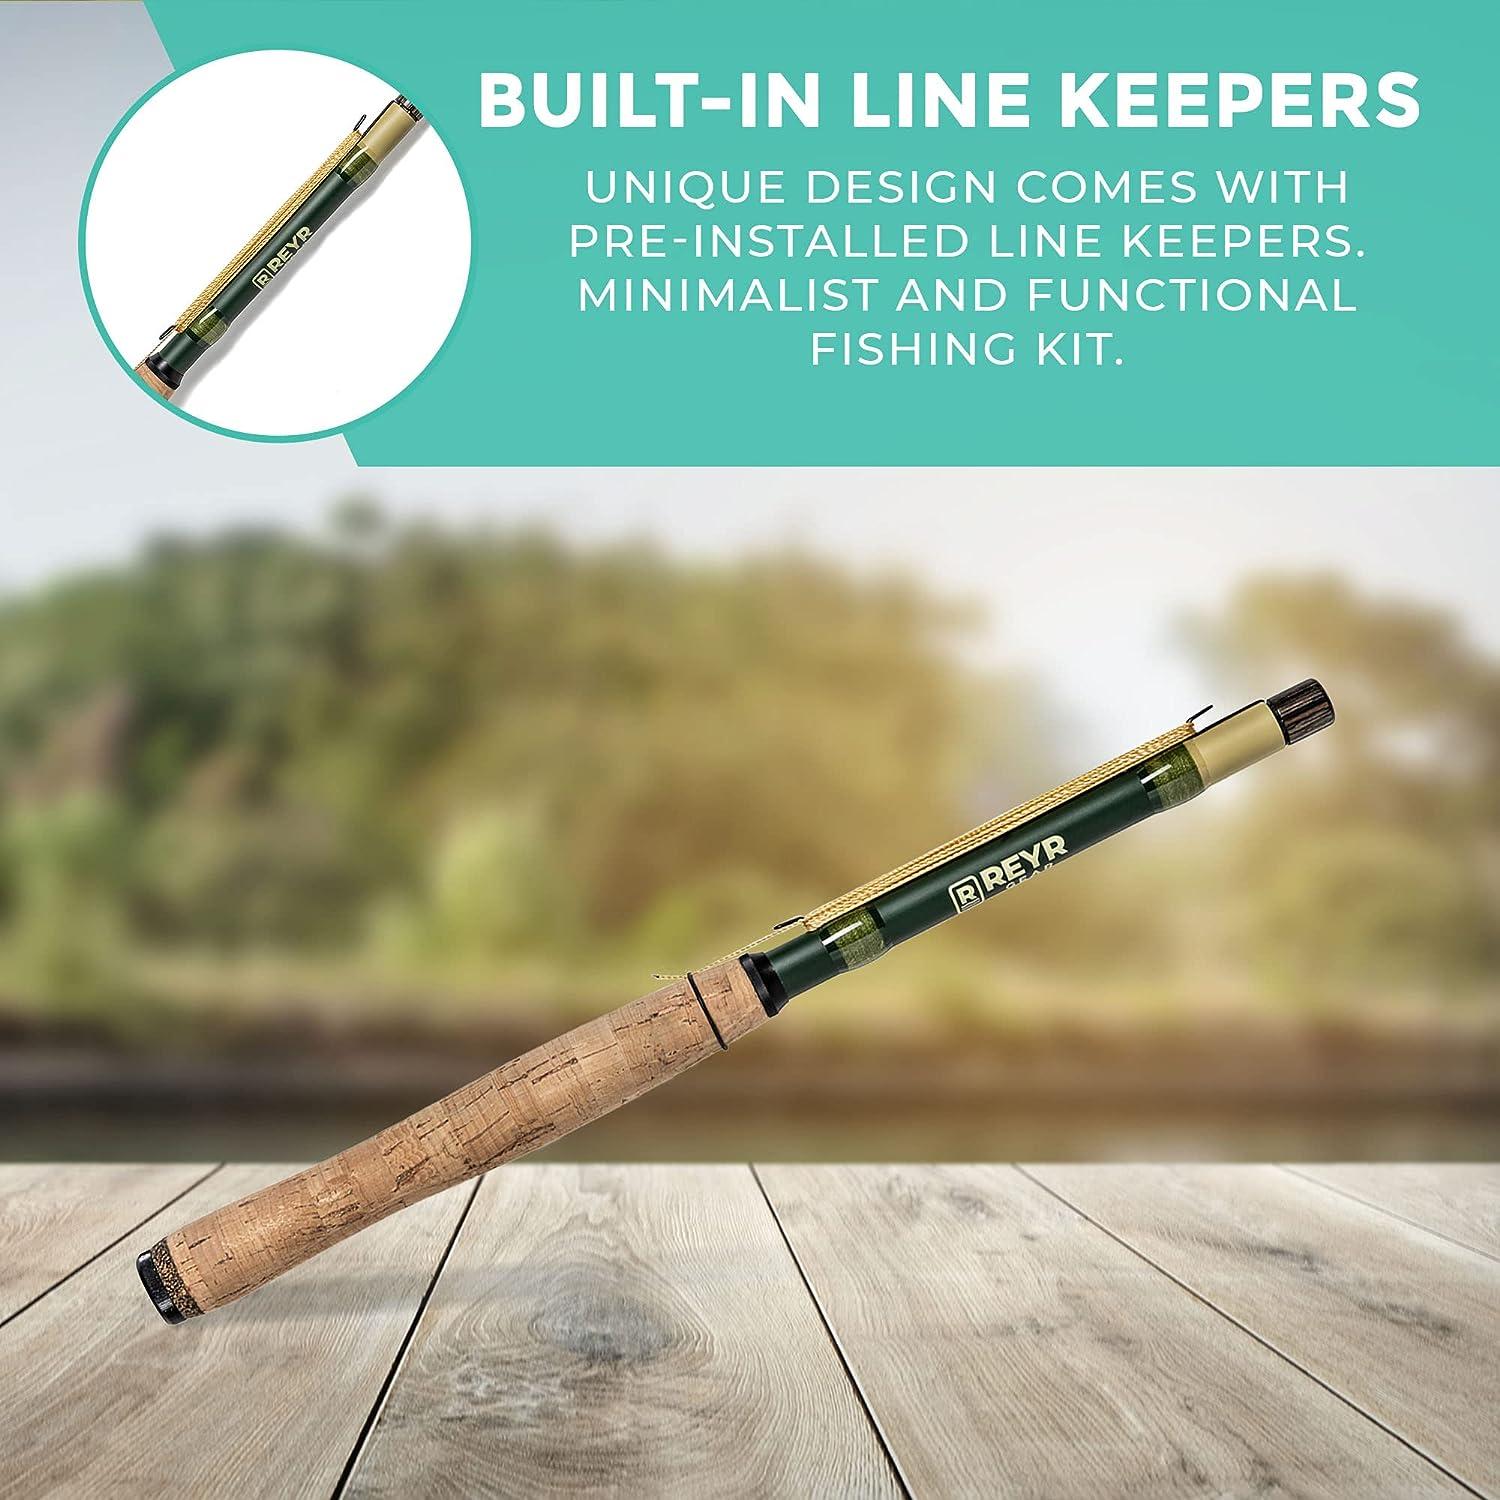 Casting and feeding line with the REYR telescoping fly rod 